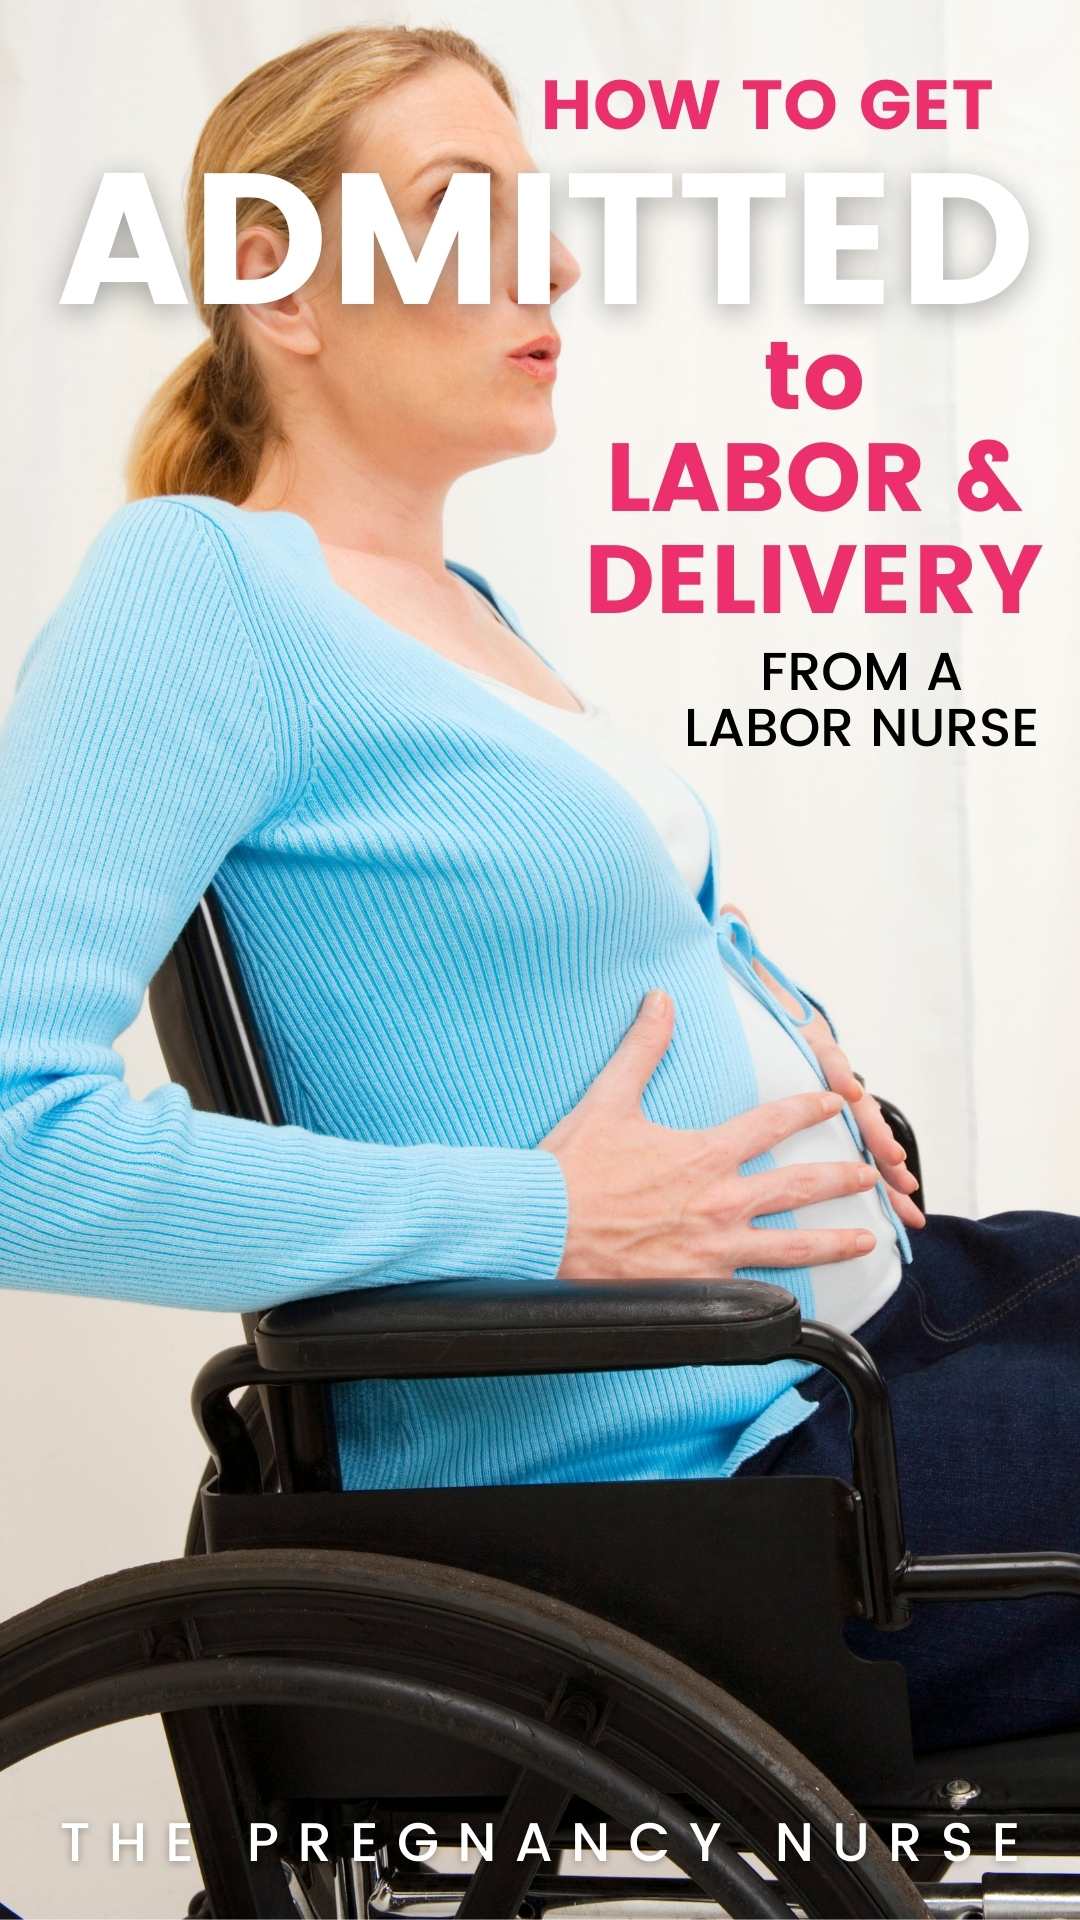 Are you pregnant and wondering how to get admitted to labor and delivery? In this blog post, we provide information on what to expect when you arrive at the hospital. We hope that this information will help pregnant women feel prepared for their upcoming birth experience. Thanks for reading!